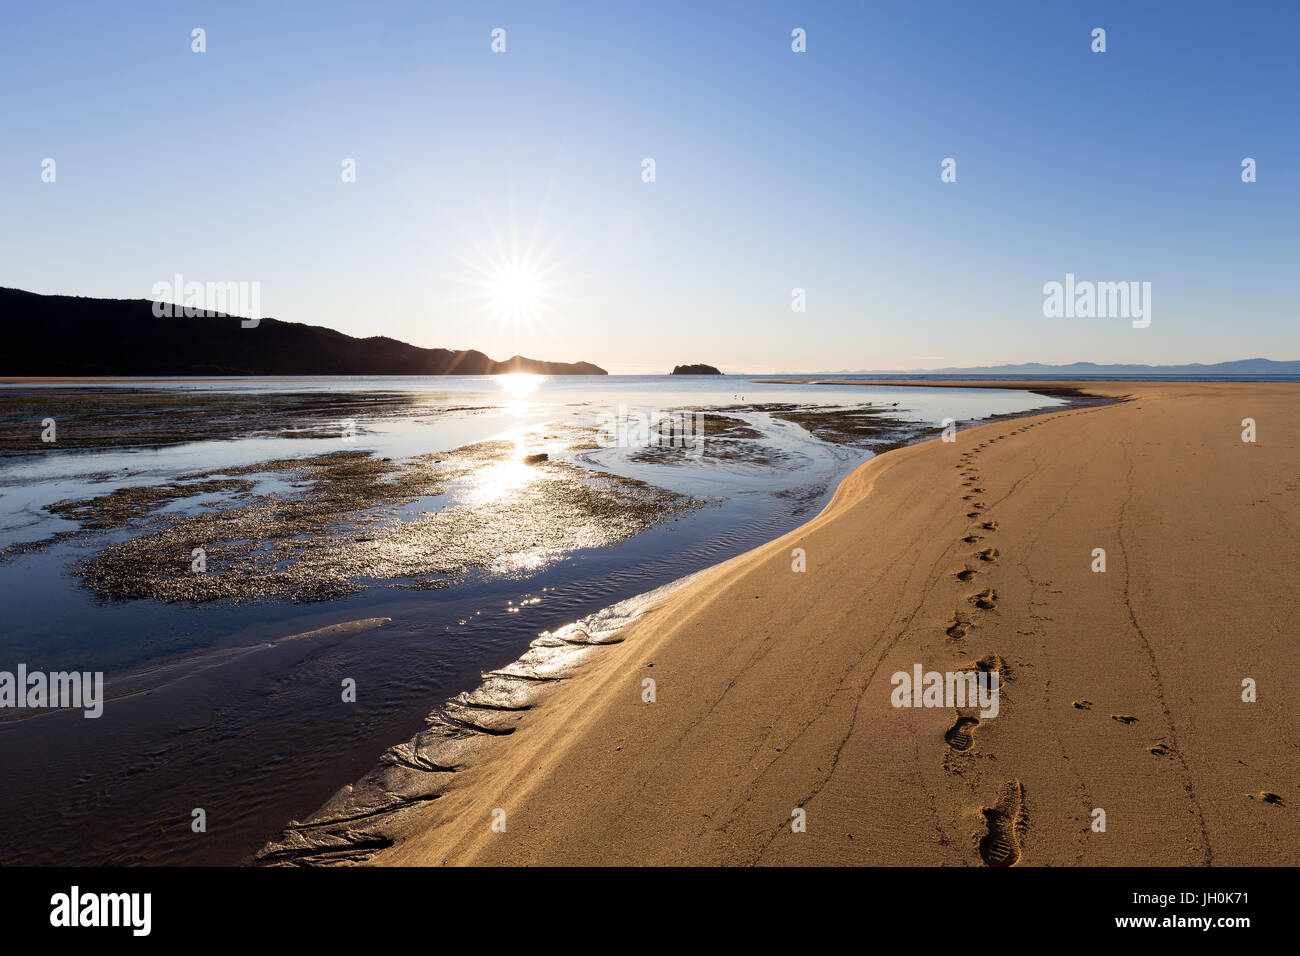 A set of footprints on a sandbar during a bright morning in the Abel Tasman National Park, New Zealand. Stock Photo